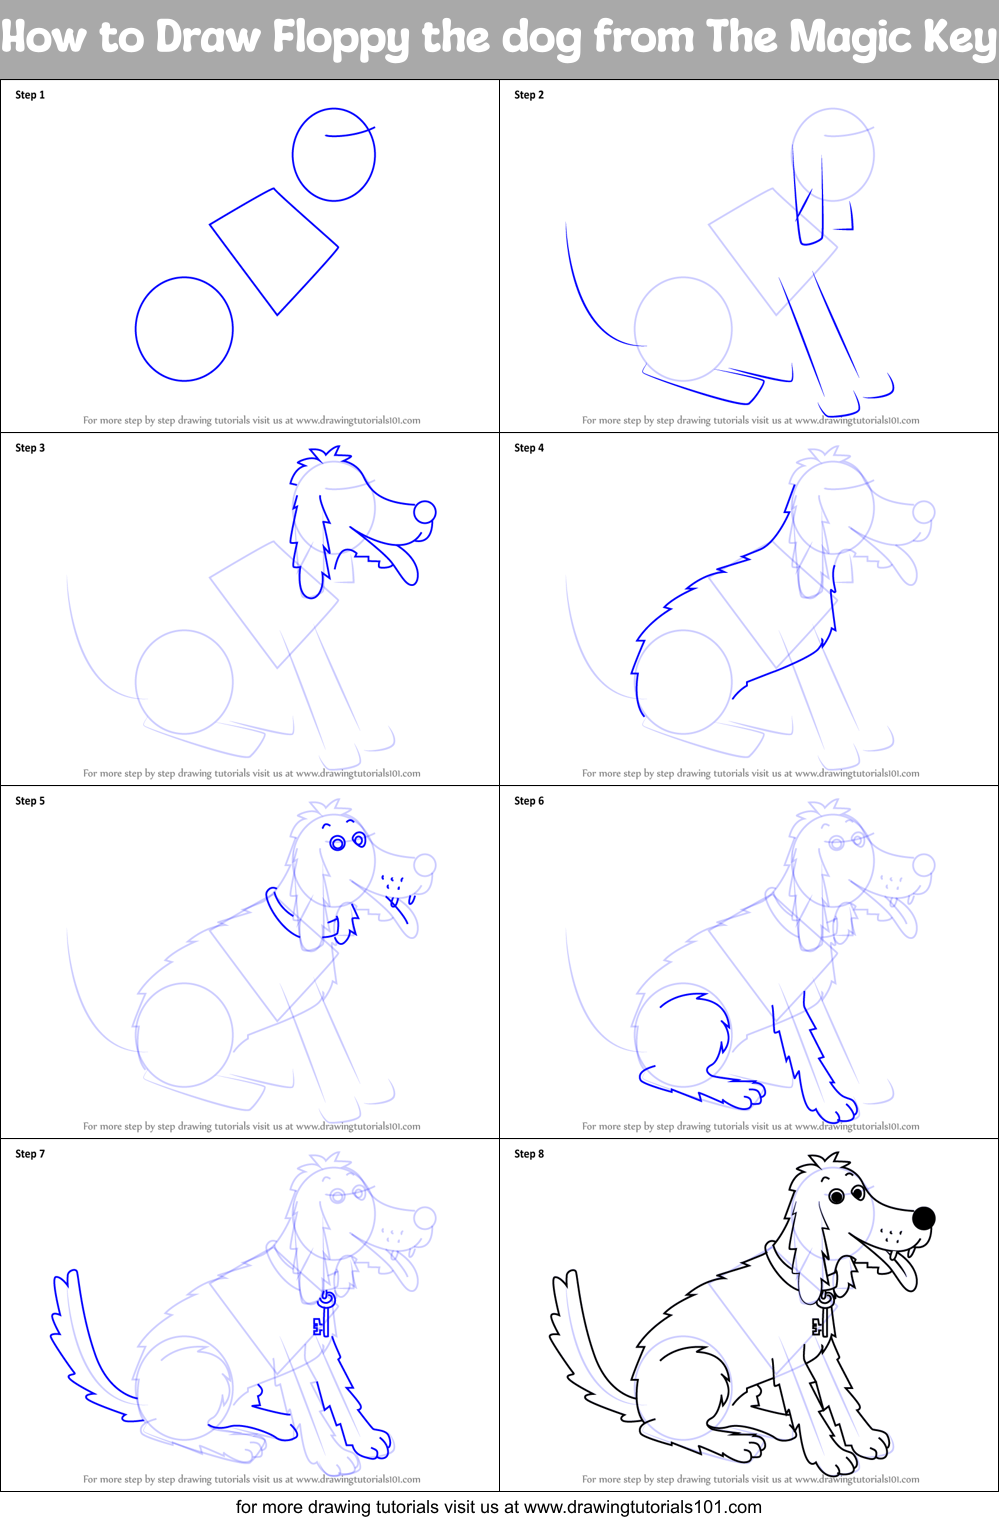 How to Draw Floppy the dog from The Magic Key printable step by step